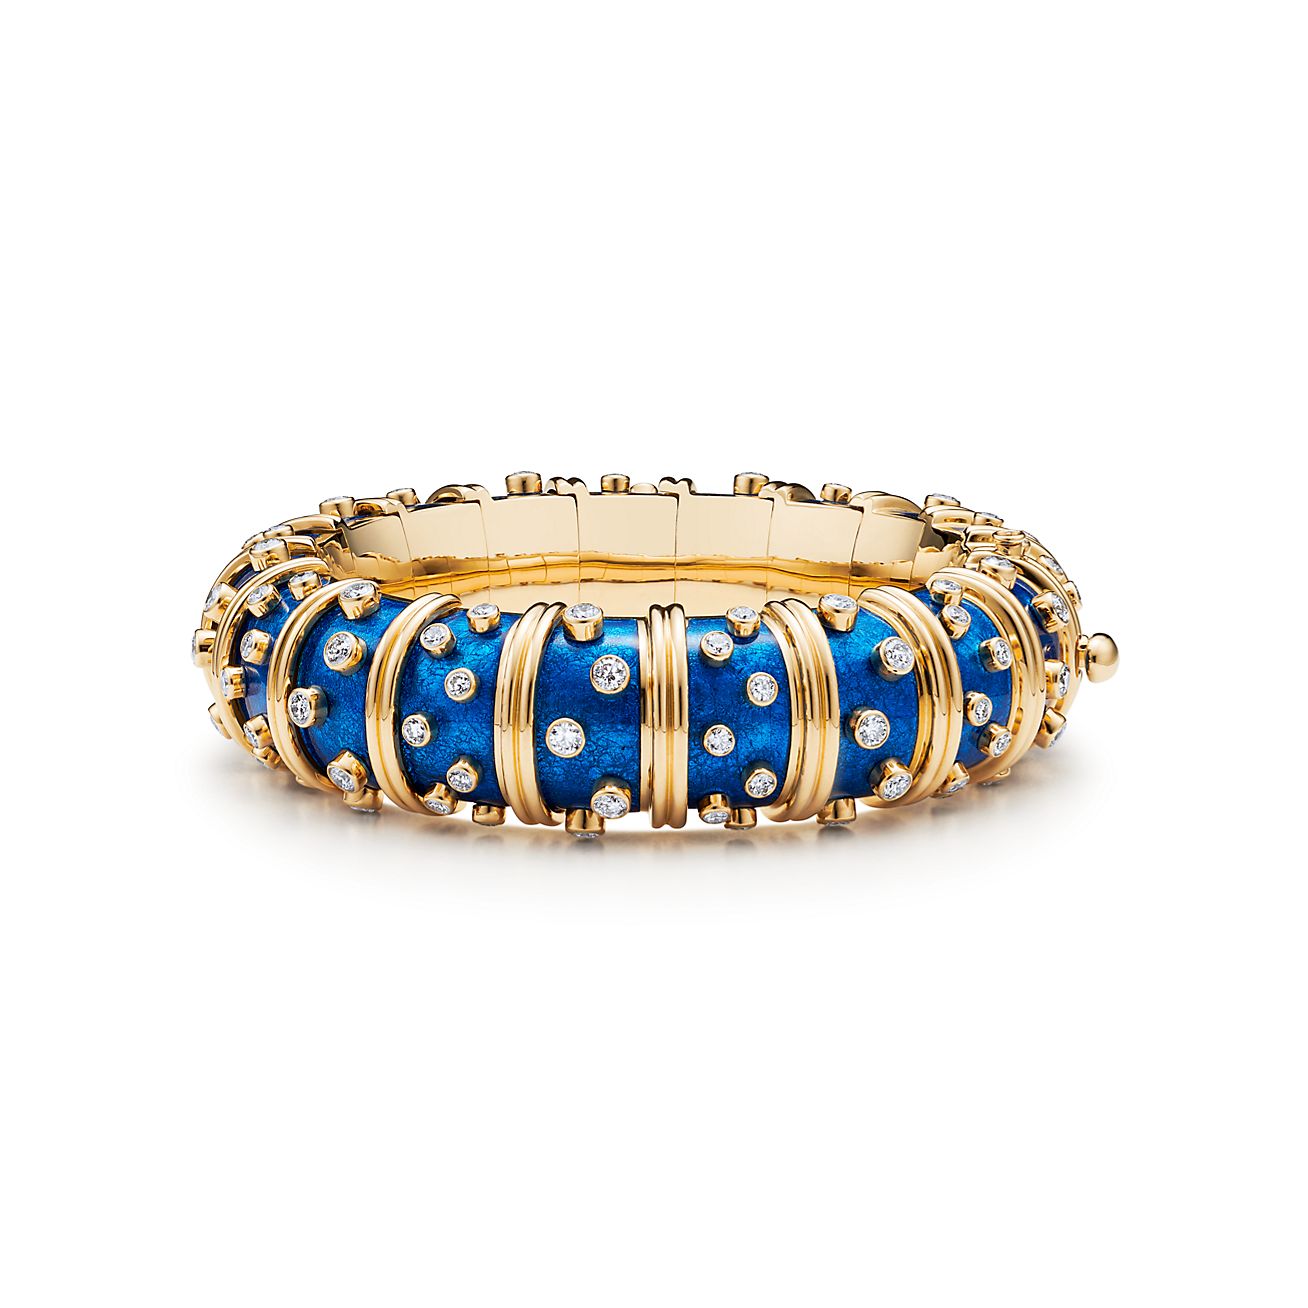 Enamel Bangle at Best Price from Manufacturers, Suppliers & Dealers